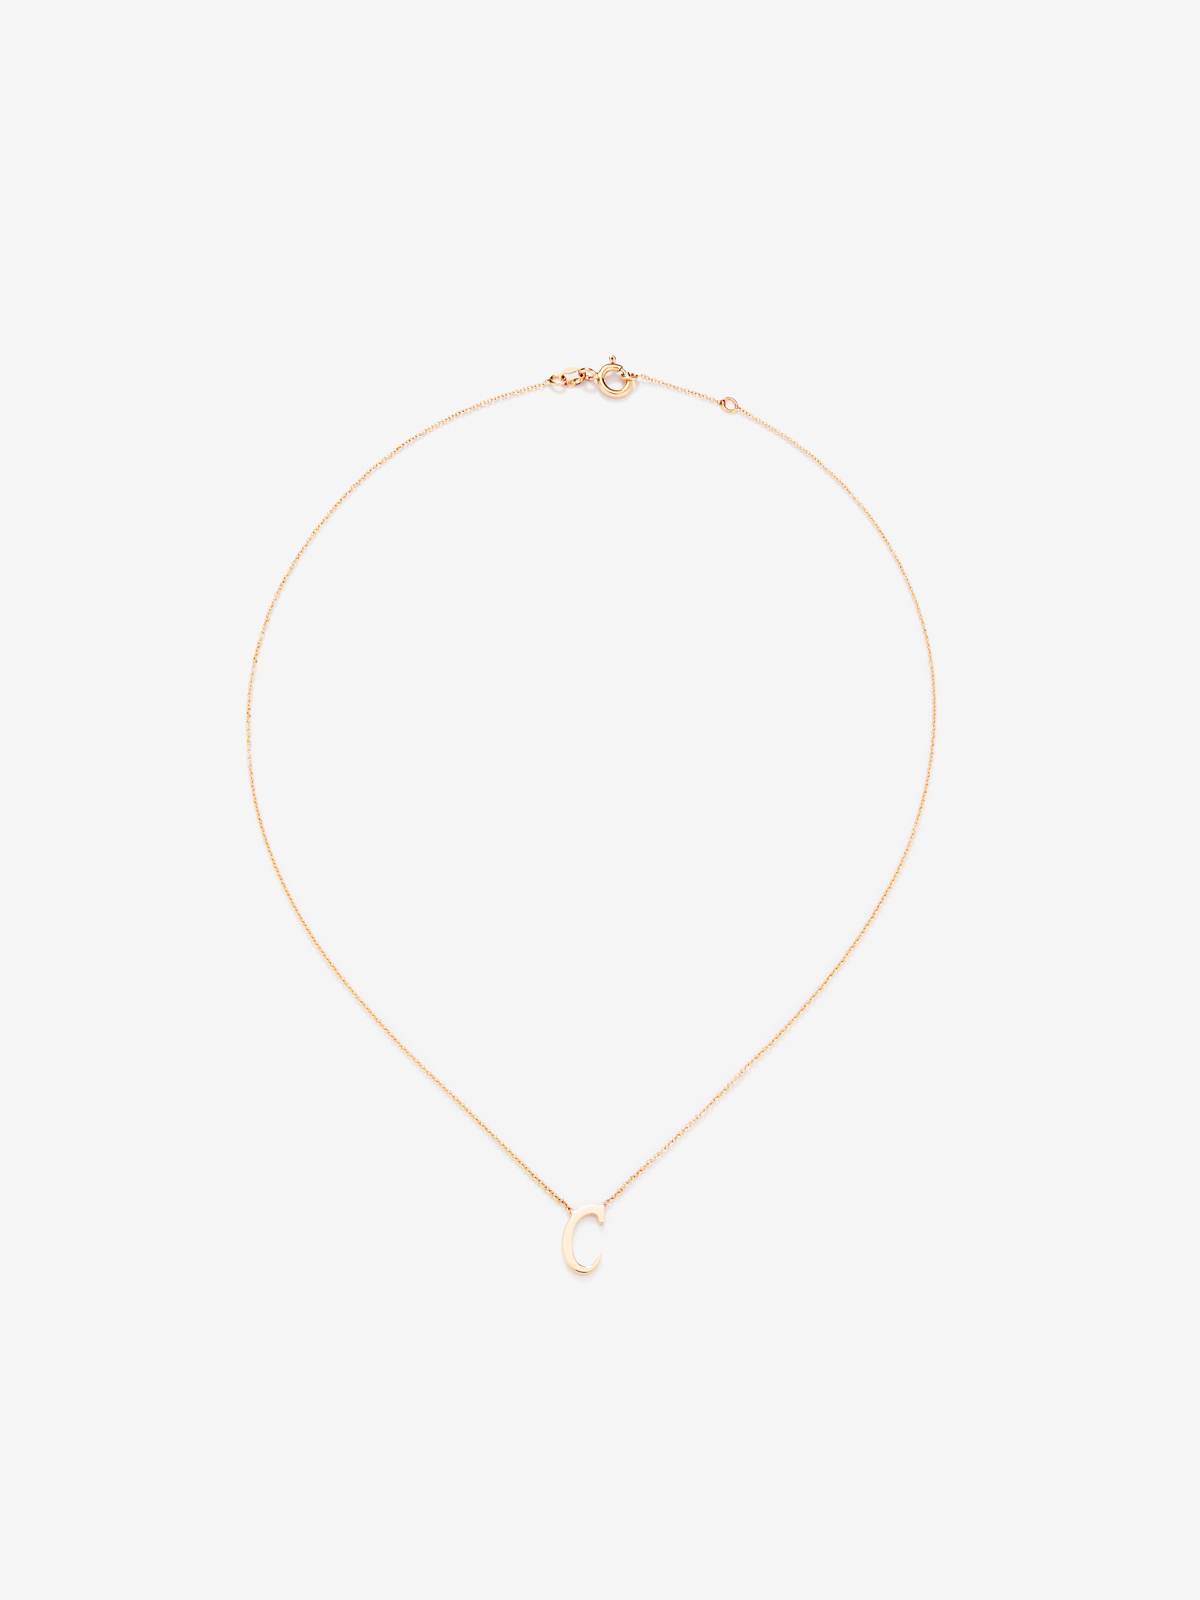 18K Rose Gold Pendant Chain with Initial C